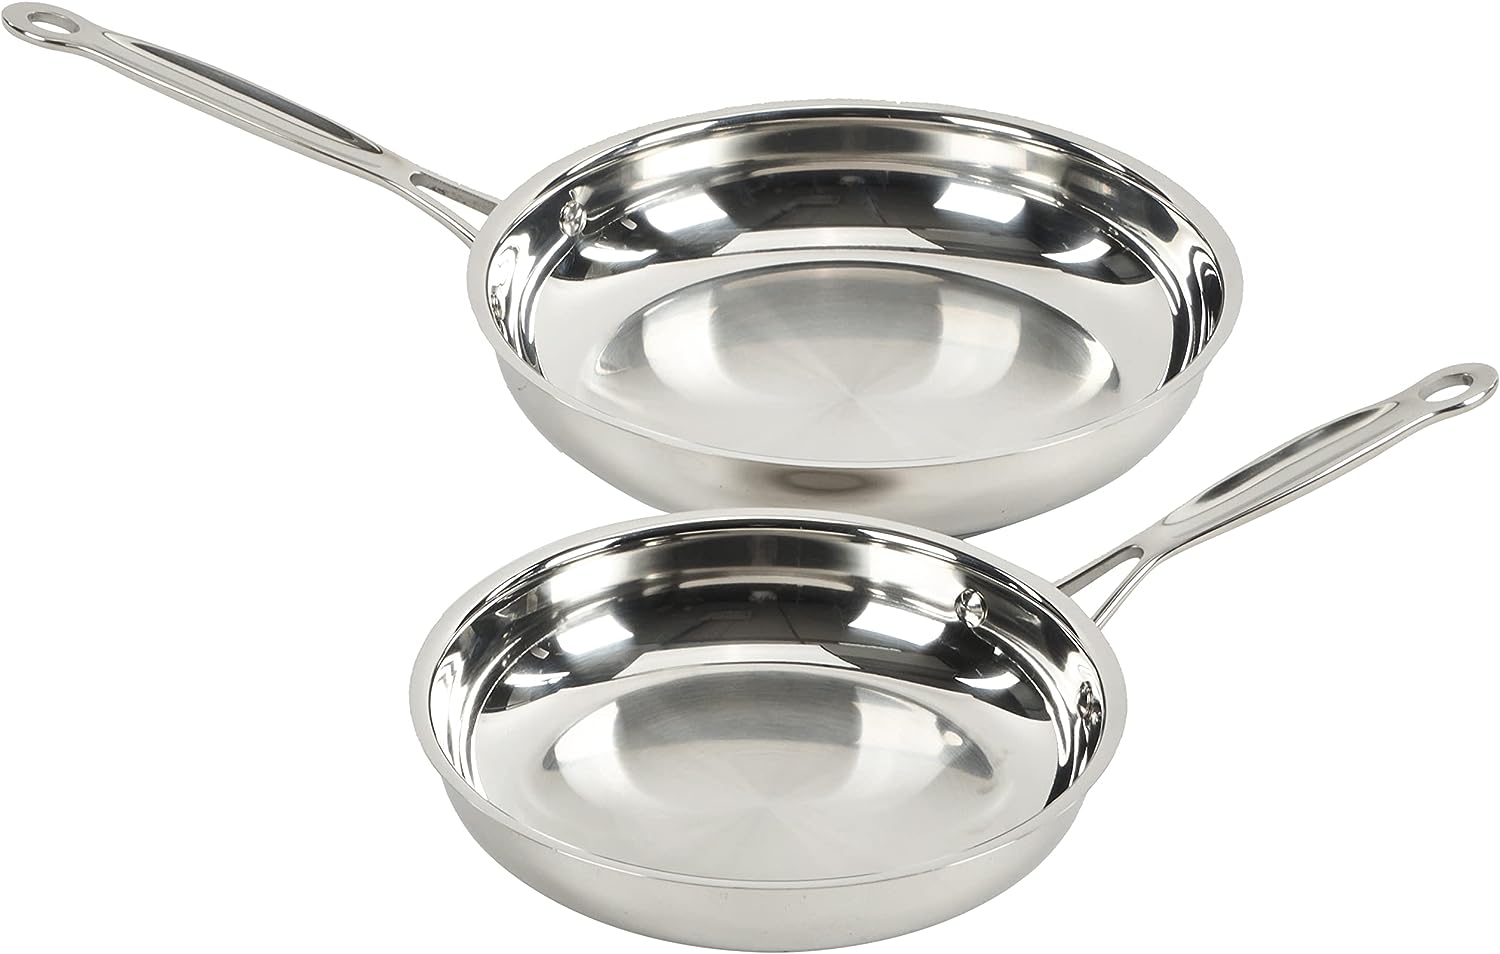 cuisinart chef's classic 11 pc stainless steel cookware set